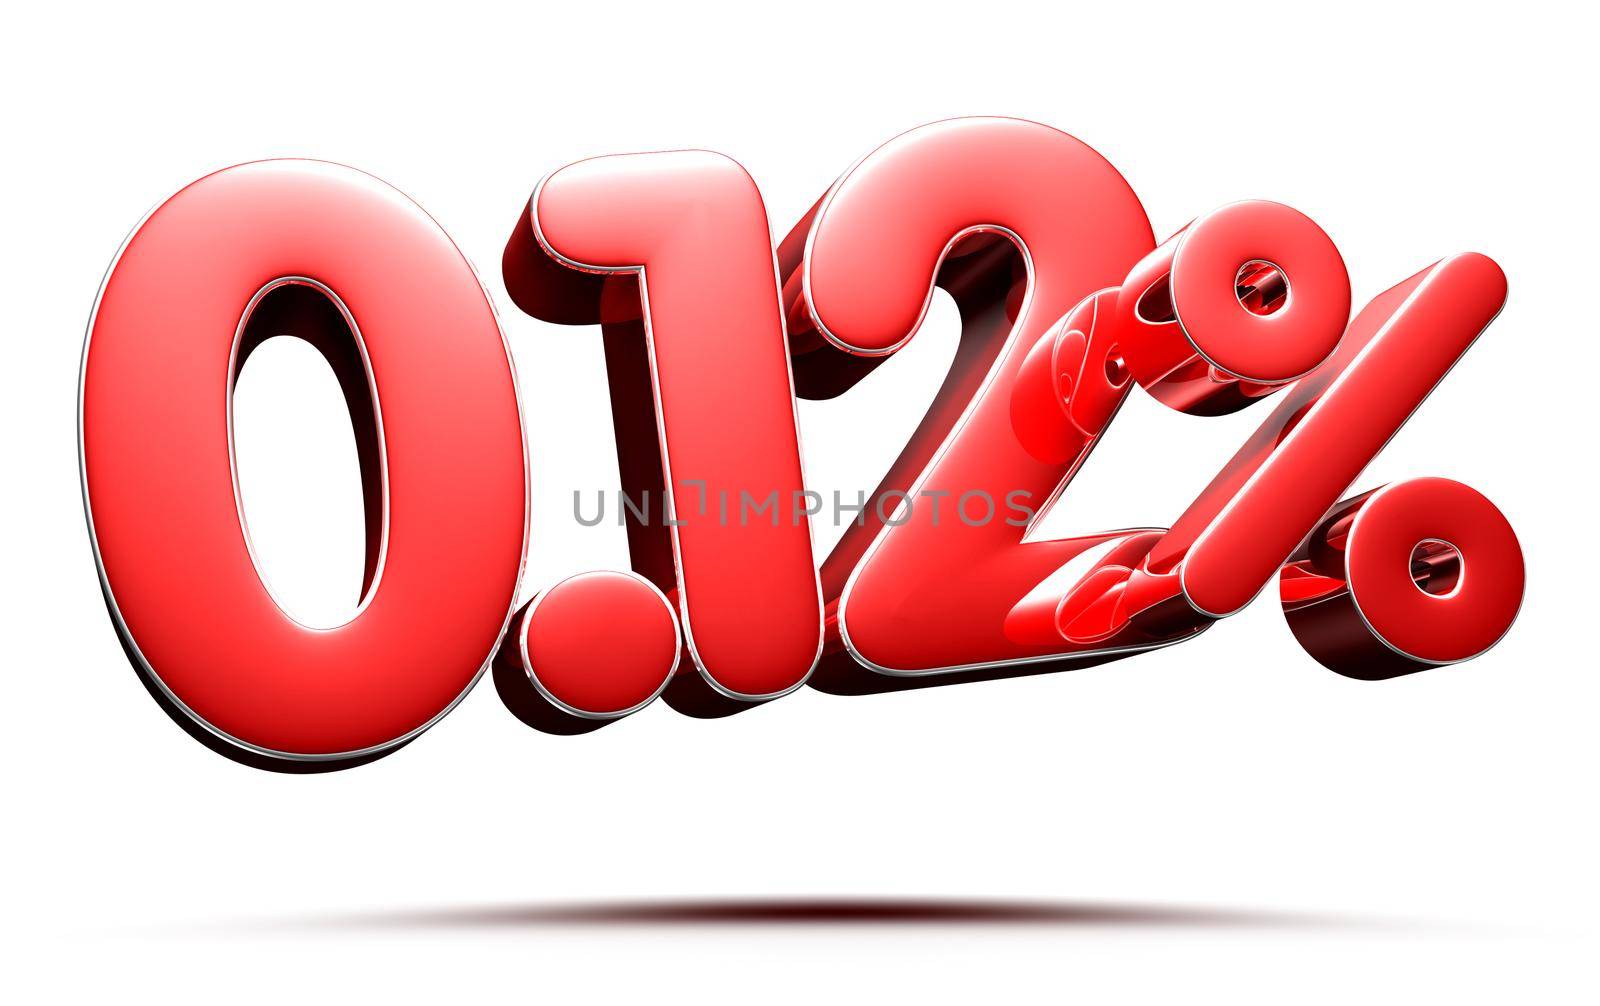 0.12 percent red on white background illustration 3D rendering with clipping path.